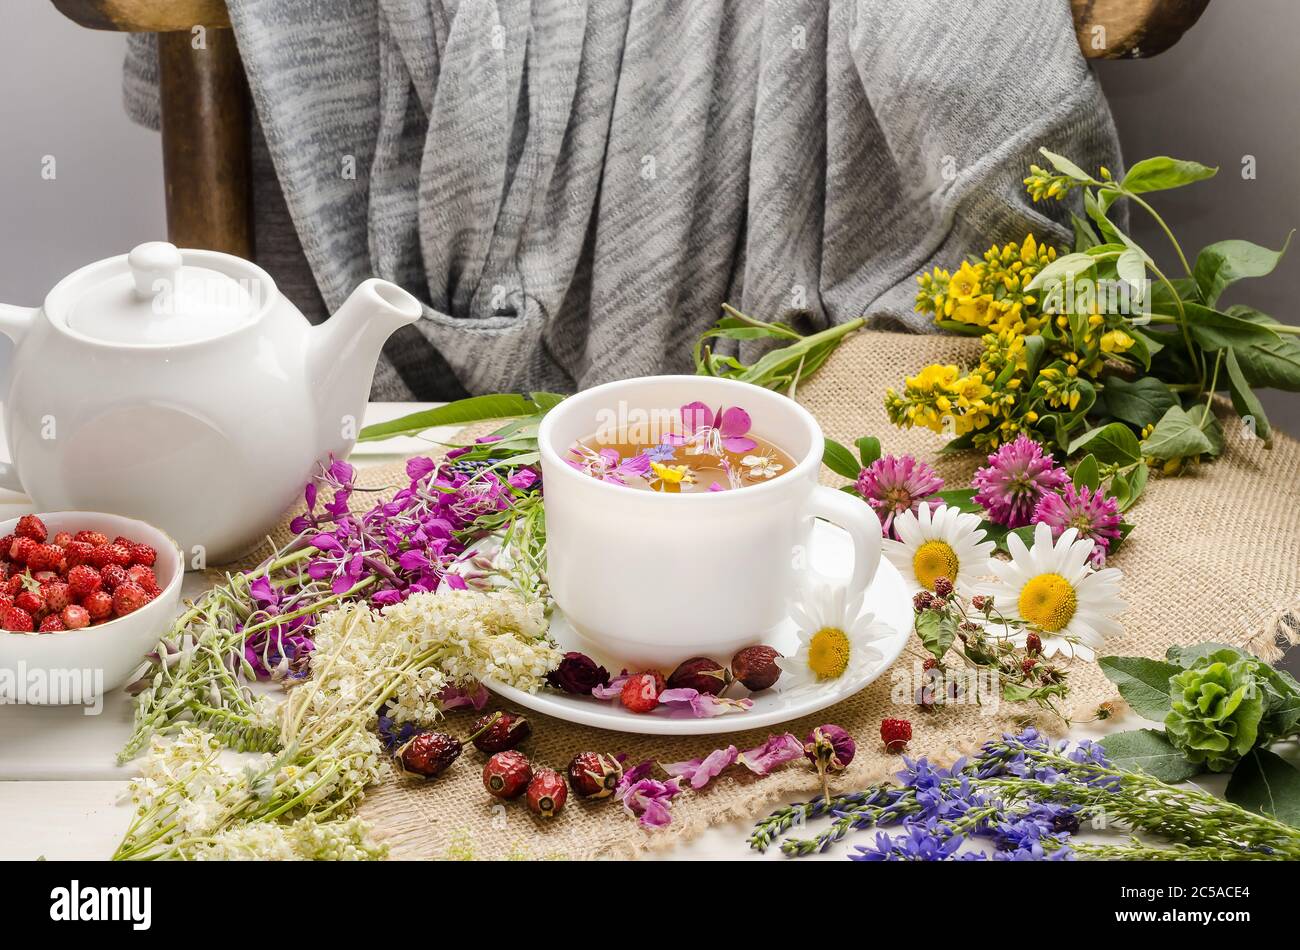 Herbal tea in a white cup with flowers. Tea ceremony. Tea with chamomile, with wild rose and clover Stock Photo